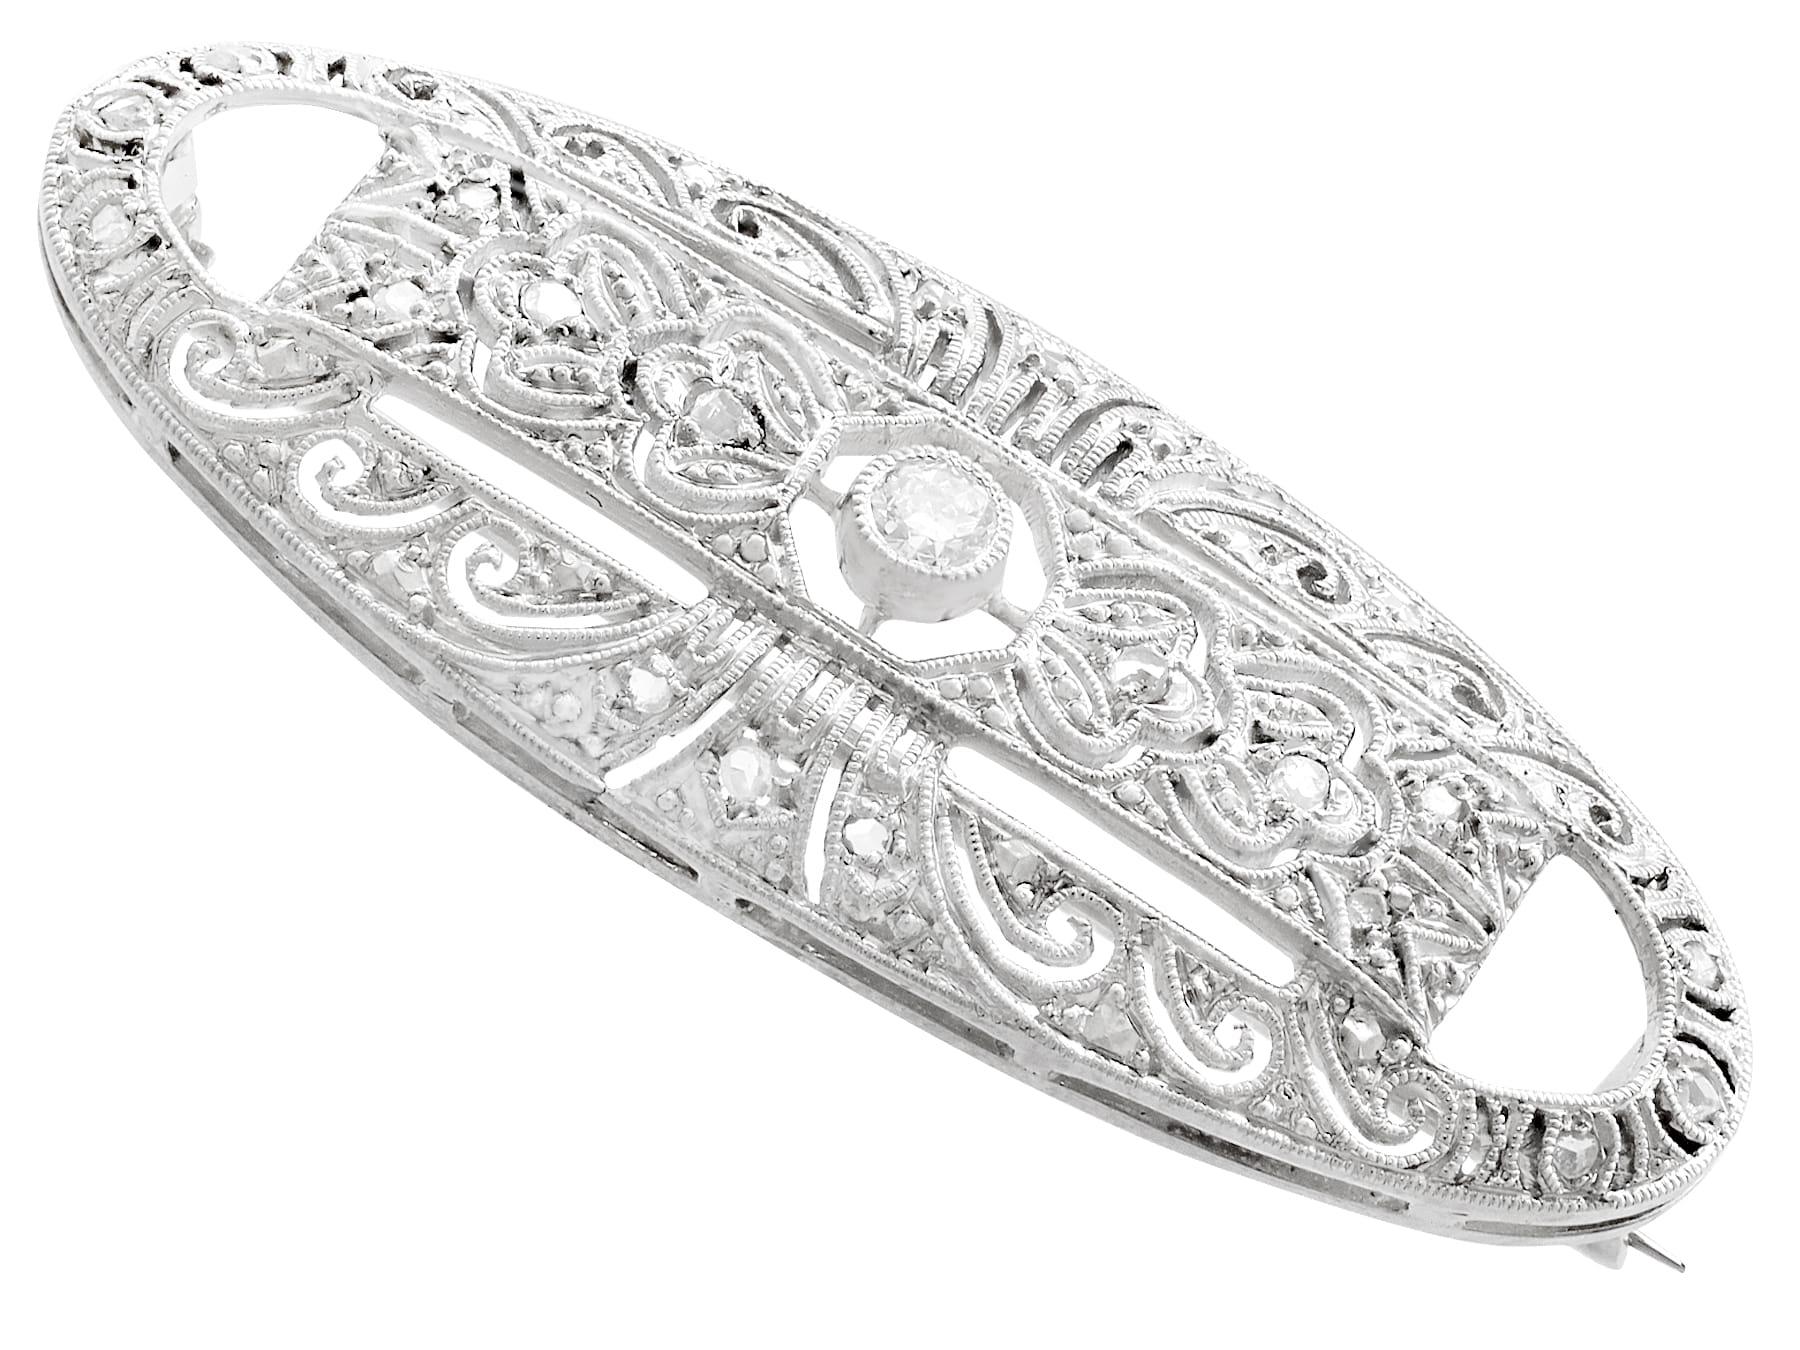 Vintage 1940s Art Deco Style Diamond and White Gold Brooch In Excellent Condition For Sale In Jesmond, Newcastle Upon Tyne